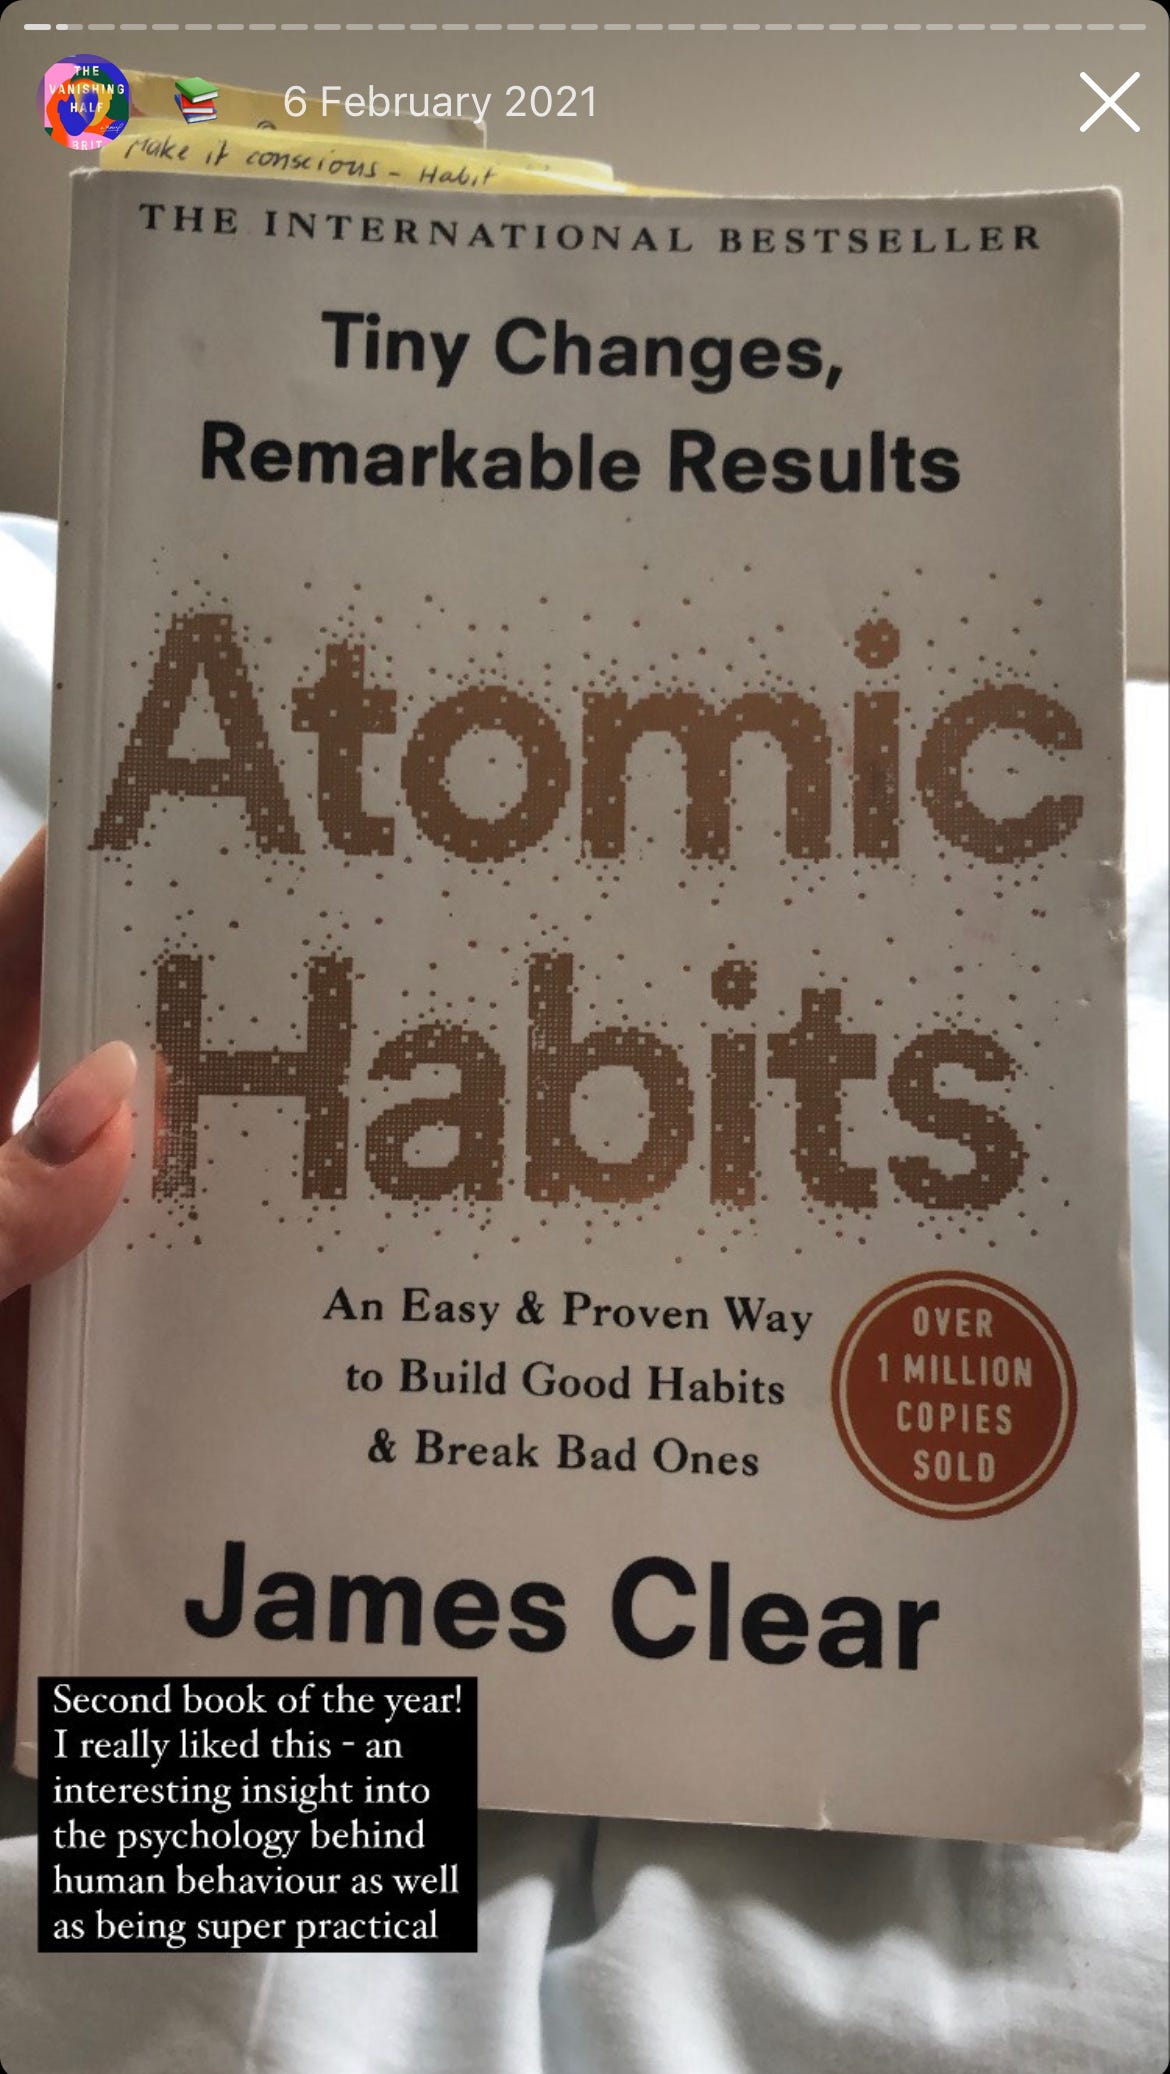 Image: I am holding the book ‘Atomic Habits’ which has a white cover and the title in gold lettering in the middle of the page. Above the title reads “Tiny Changes, Remarkable Results” and below the title reads “An Easy & Proven Way to Build Good Habits and Break Bad Ones”. Below the book is a text box that reads “Second book of the year! I really liked this - an interesting insight into the psychology behind human behaviour as well as being super practical.’